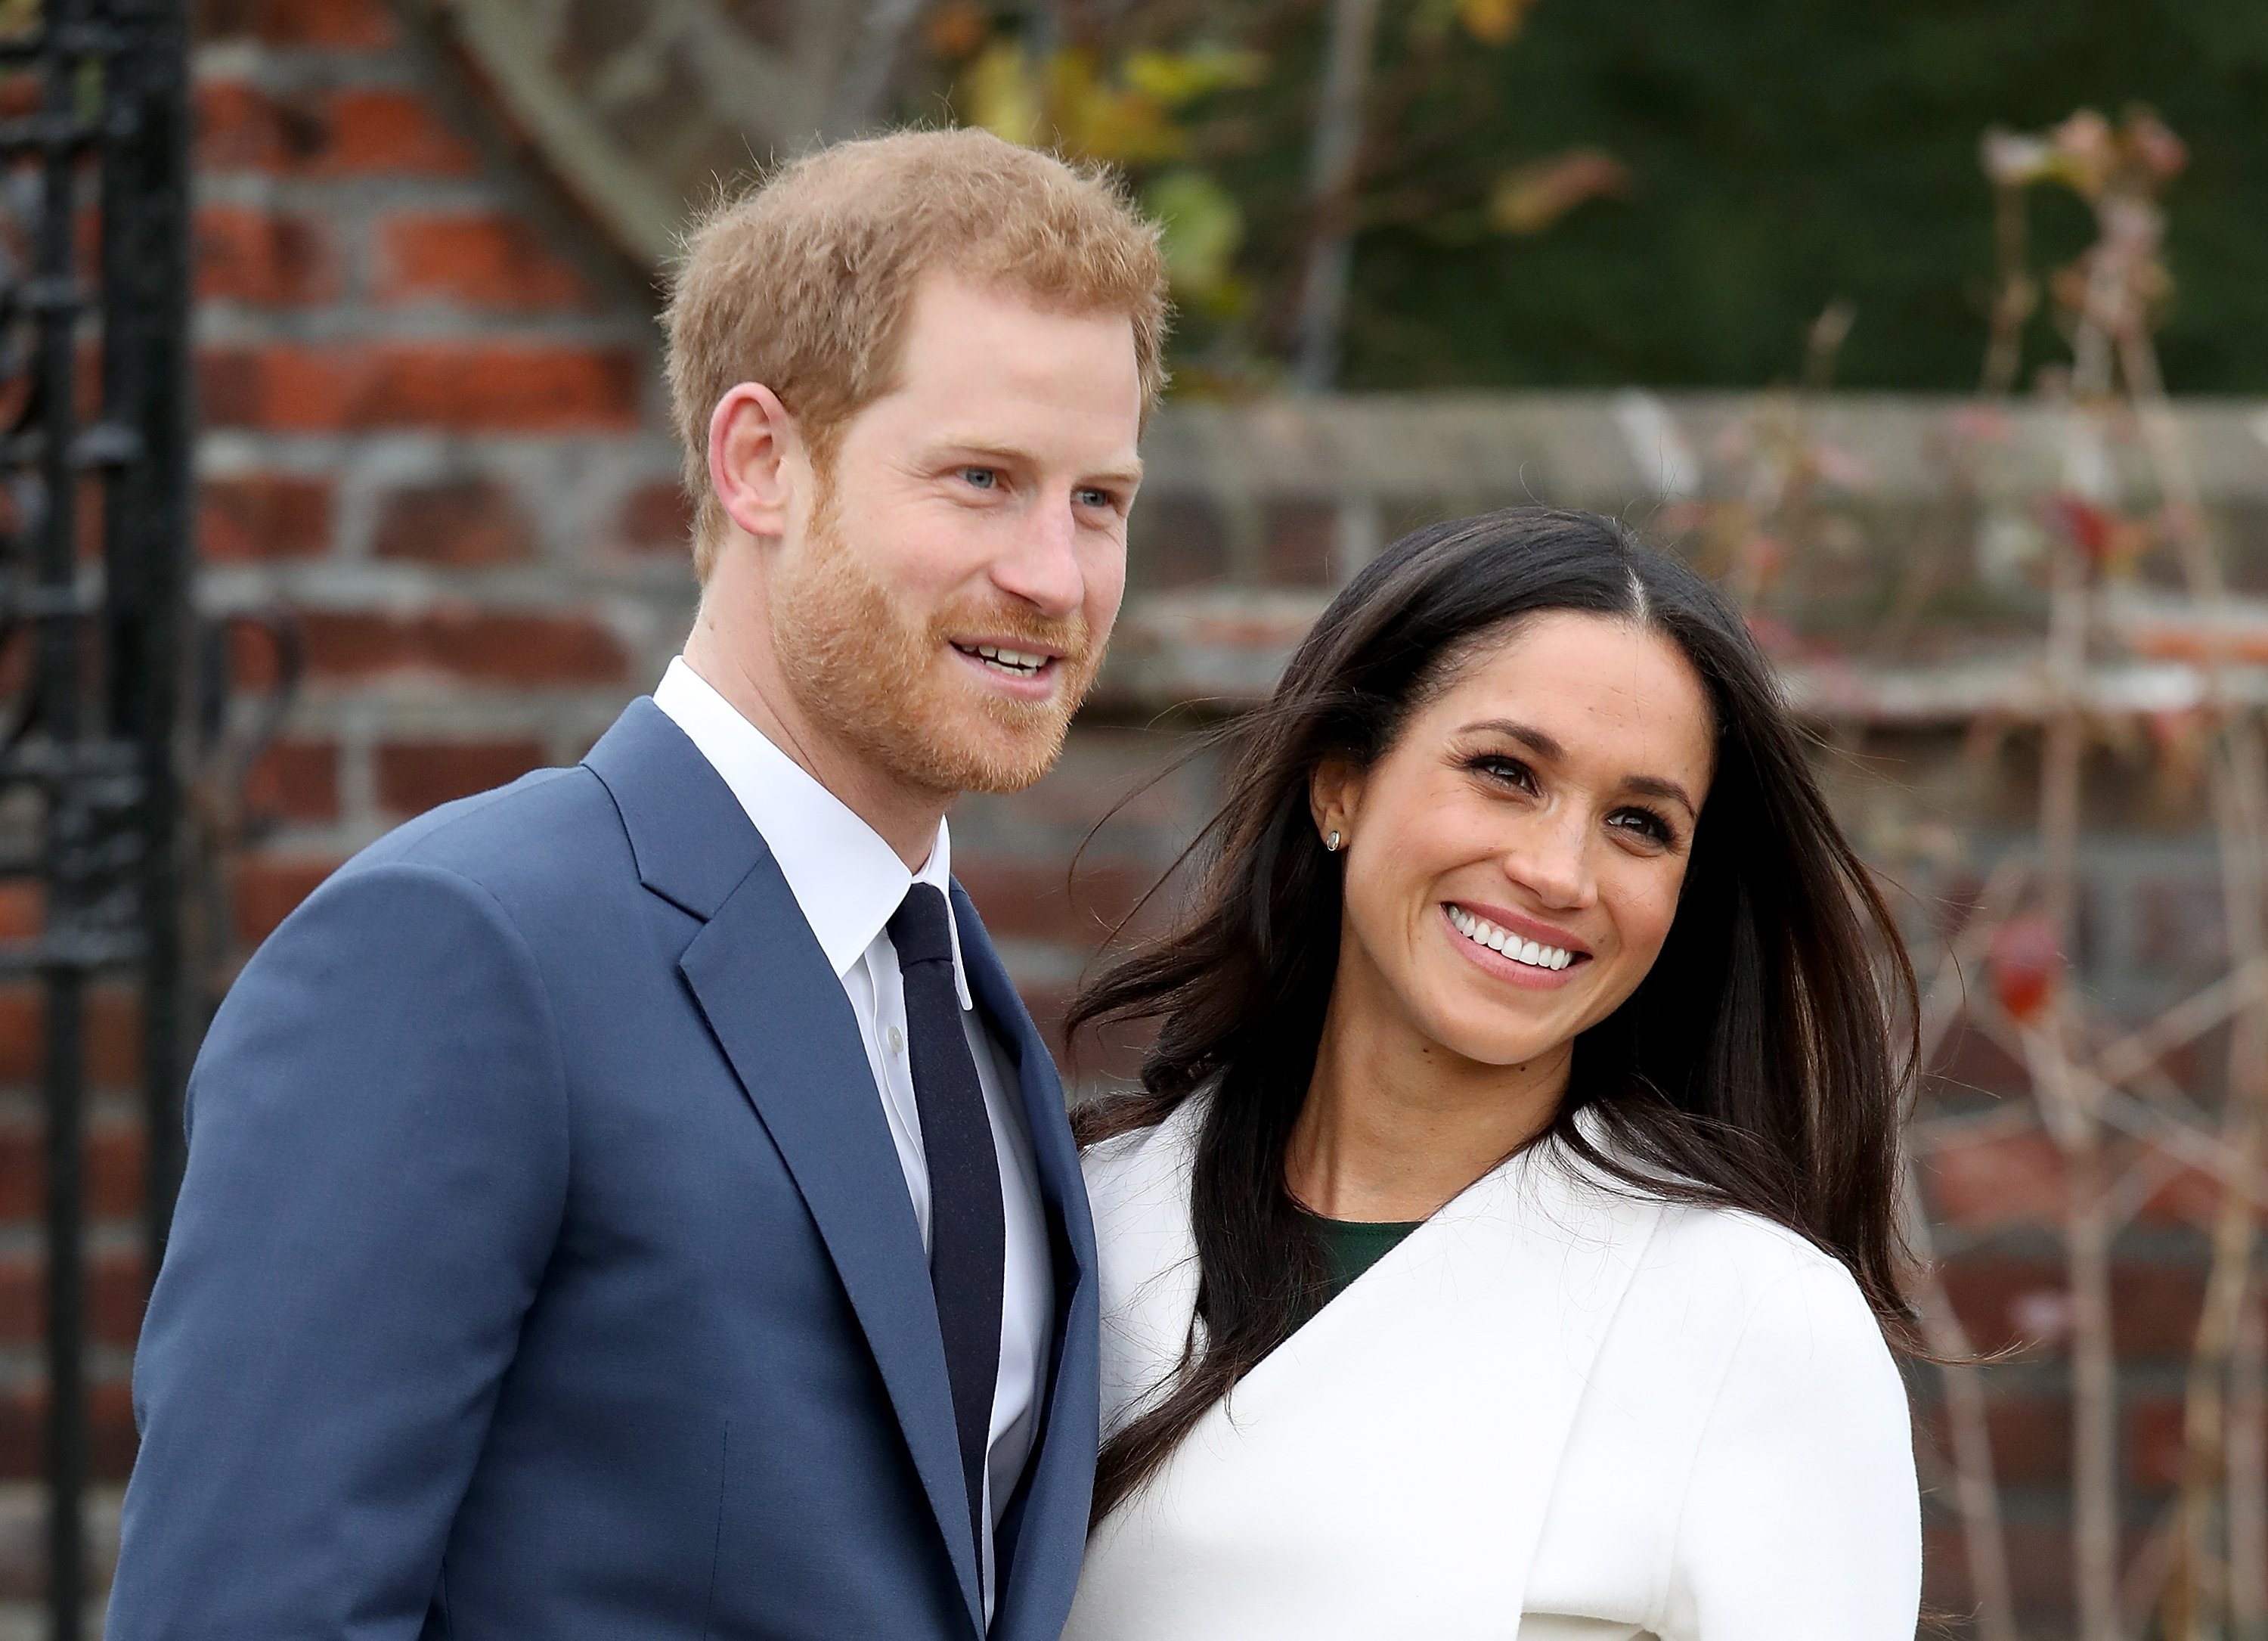 Prince Harry and Meghan Markle during an official photocall to announce their engagement at The Sunken Gardens at Kensington Palace on November 27, 2017 in London, England. | Source: Getty Images